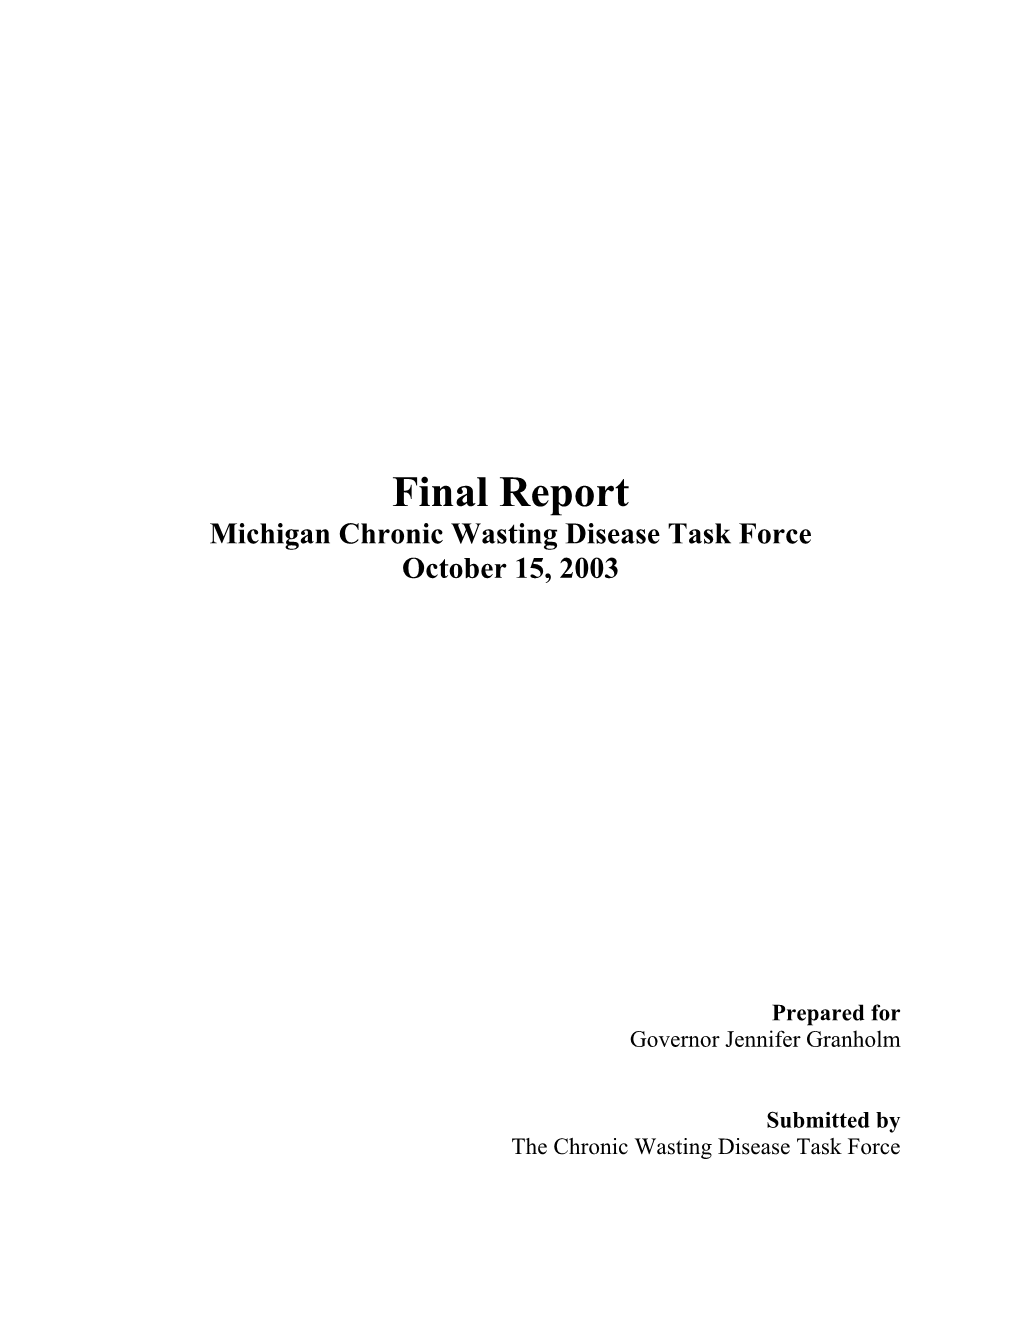 Final Report Michigan Chronic Wasting Disease Task Force October 15, 2003